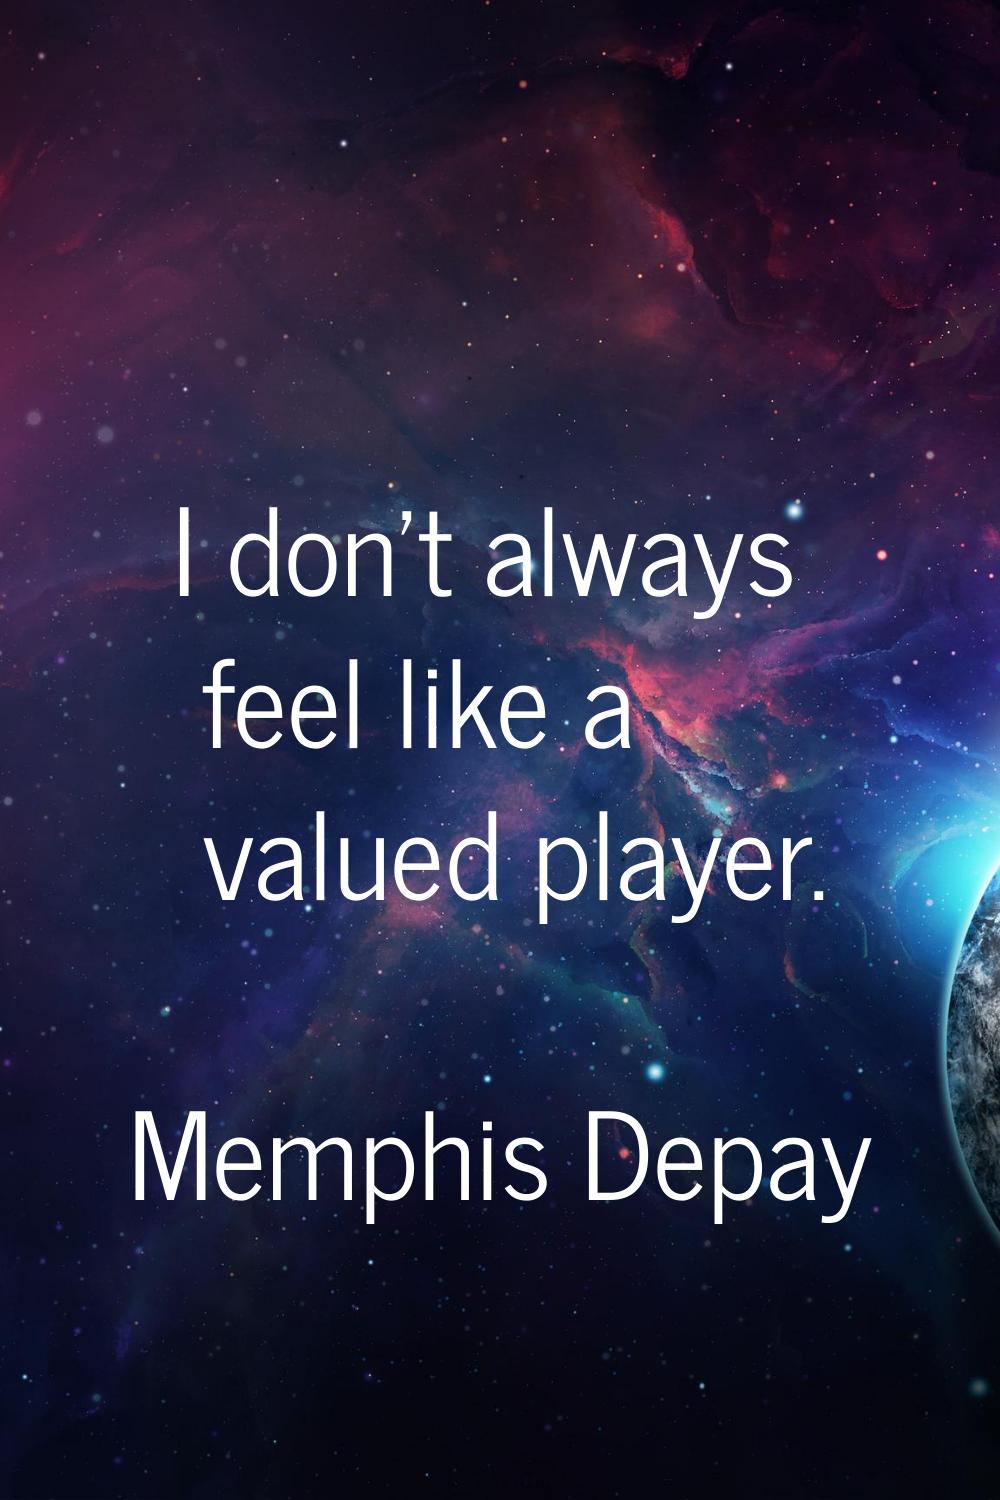 I don't always feel like a valued player.